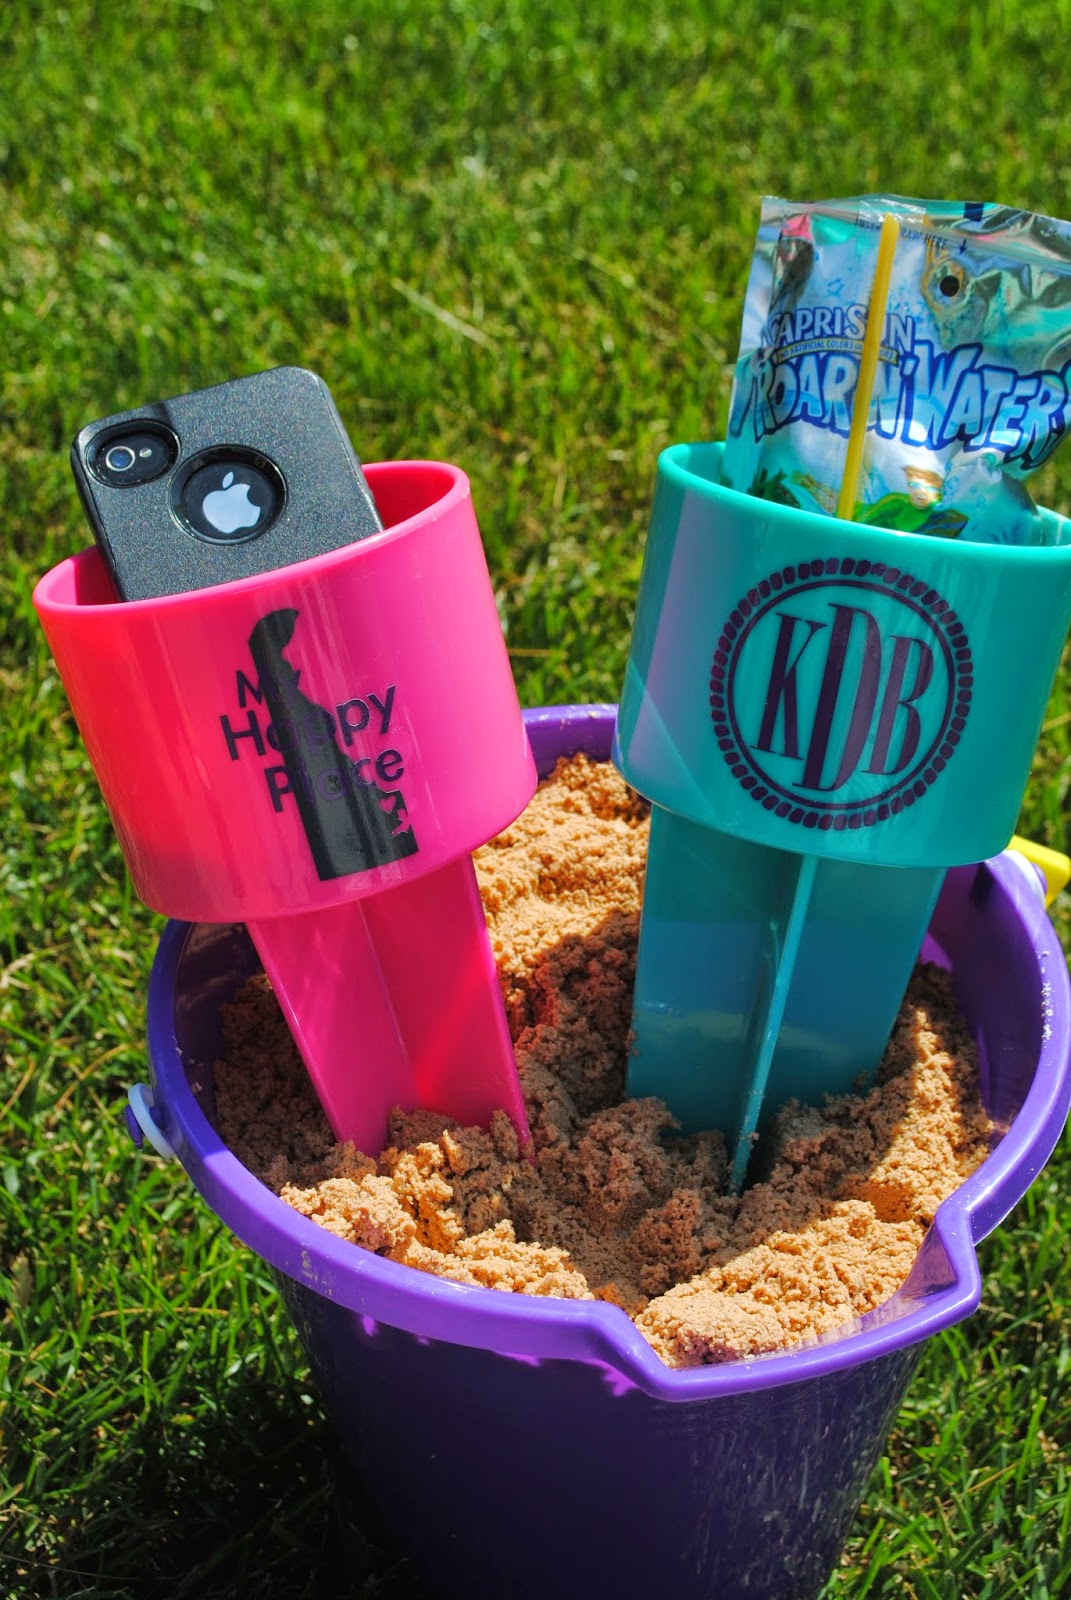 Spikers, cup holders, ideas